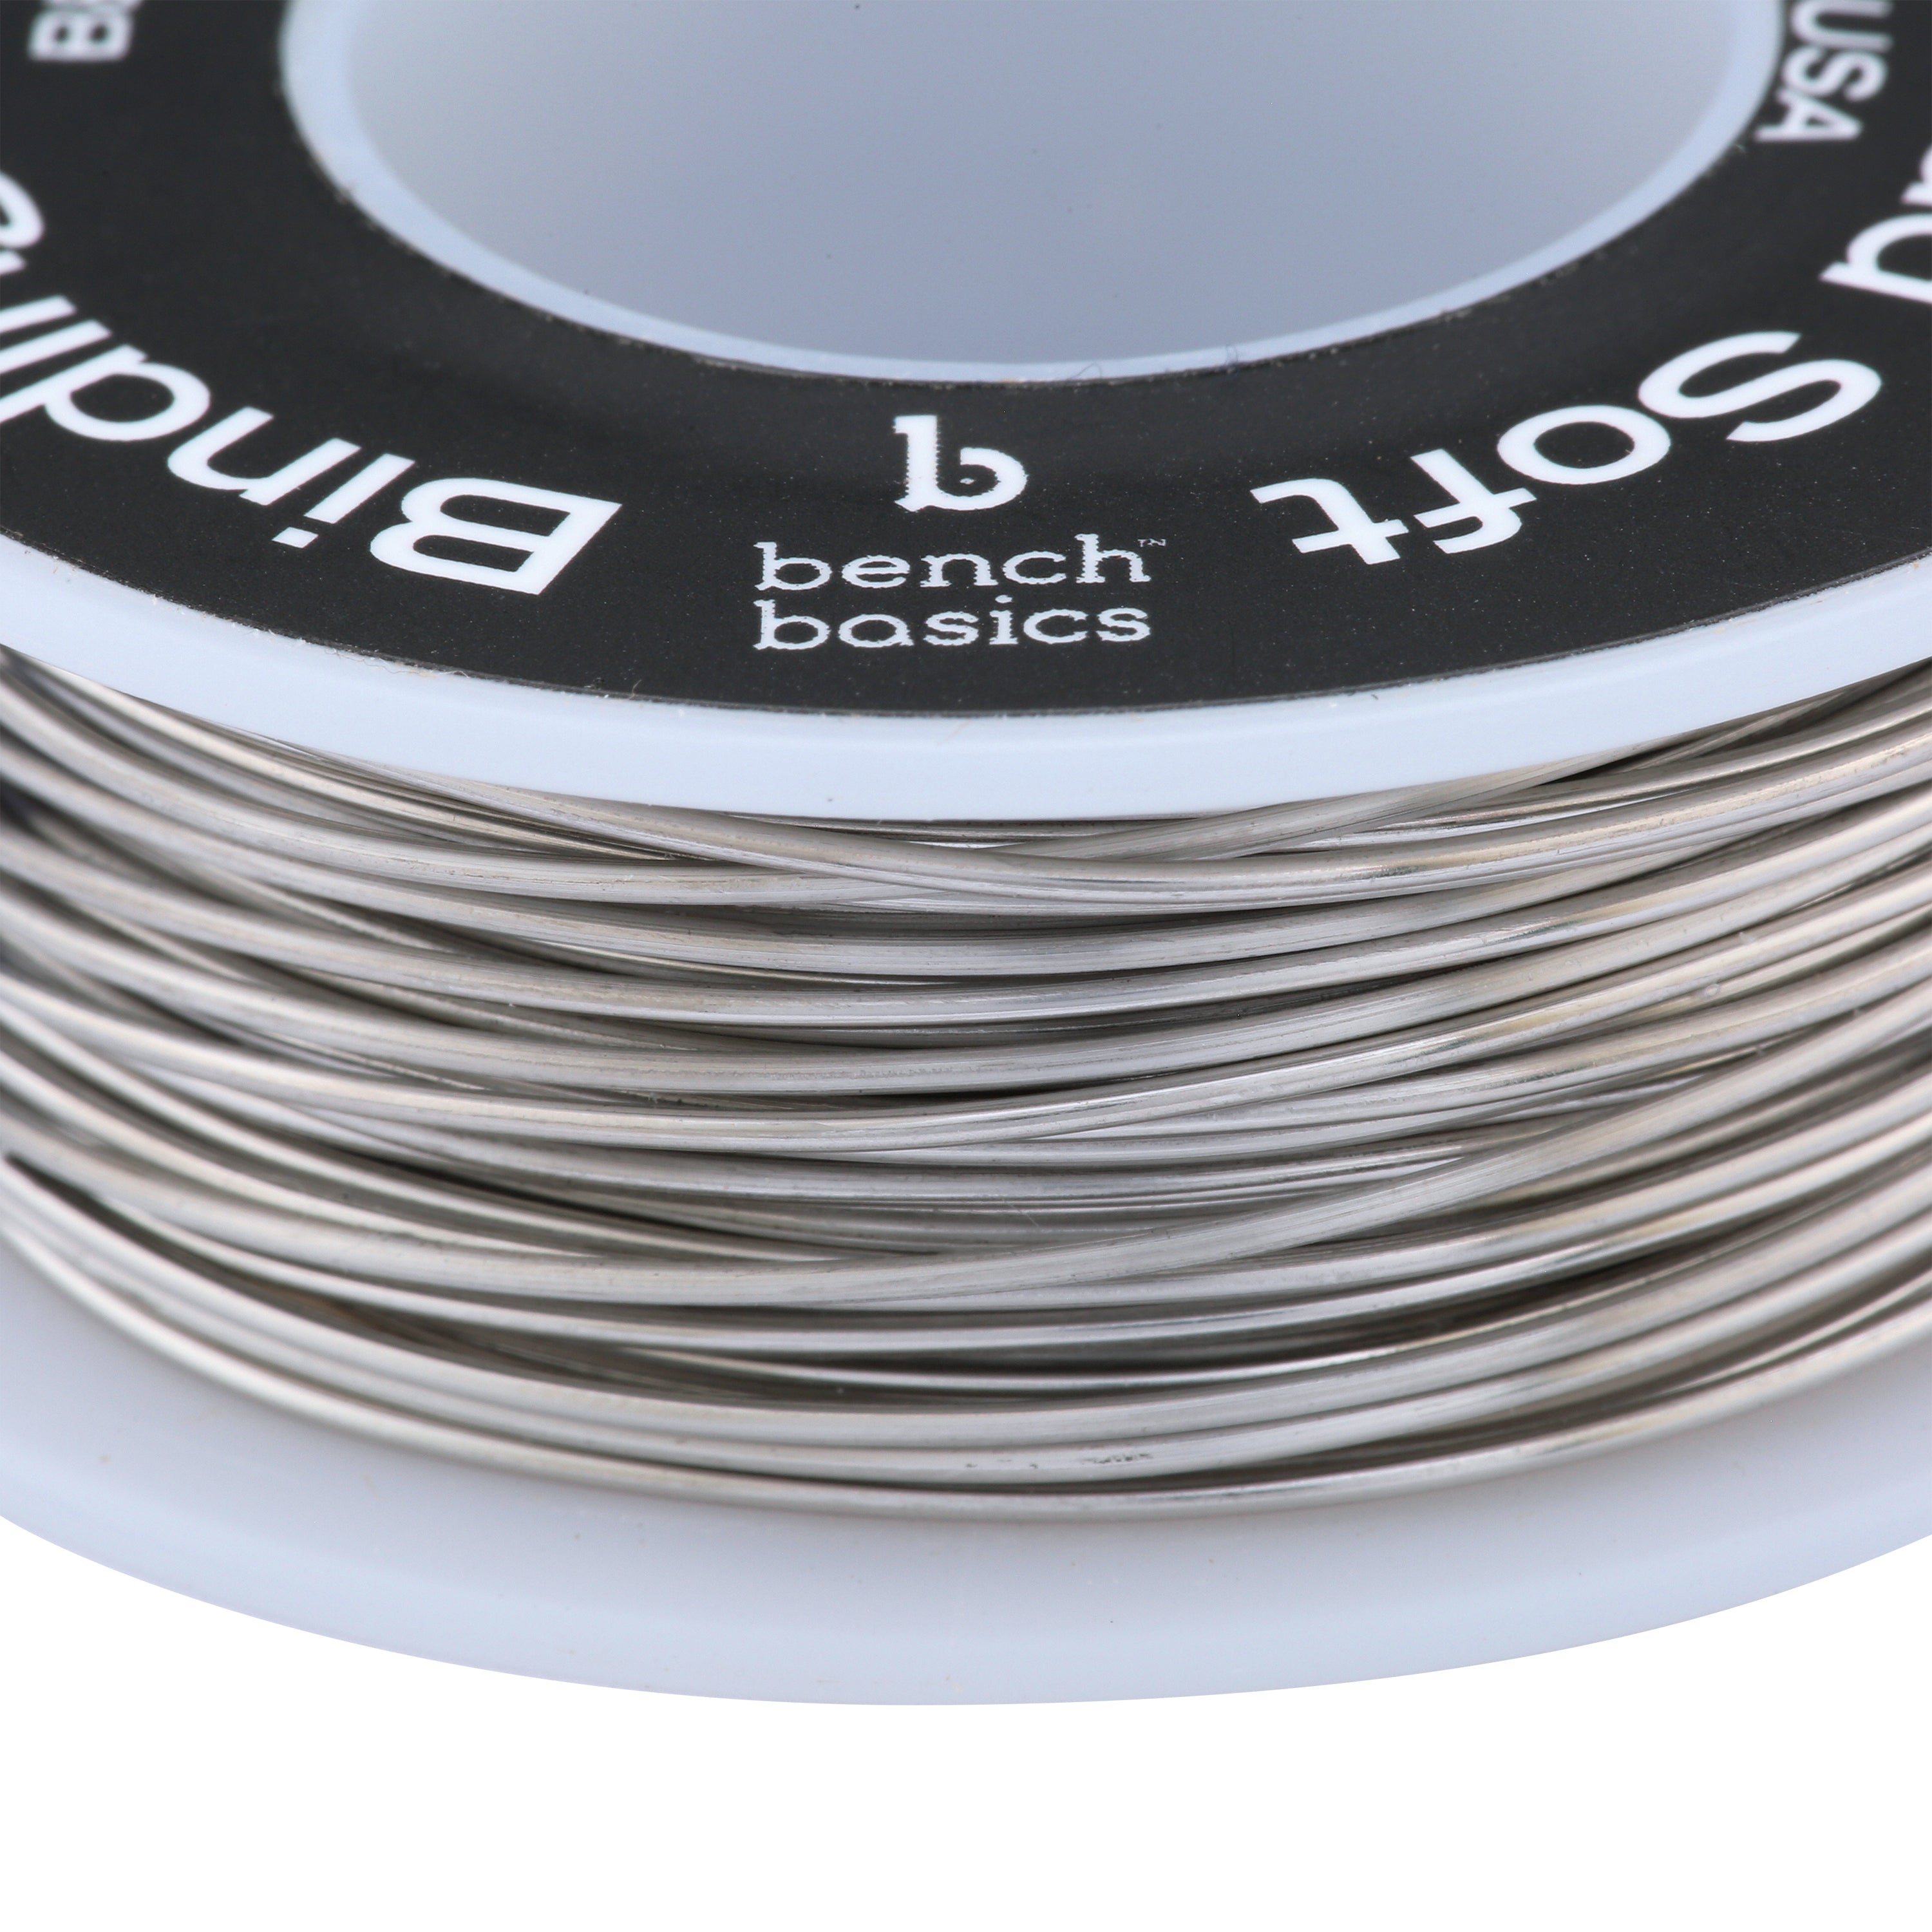 22 Gauge Stainless Steel Wire for Jewelry Making, Bailing Wire Snare Wire  Trappi